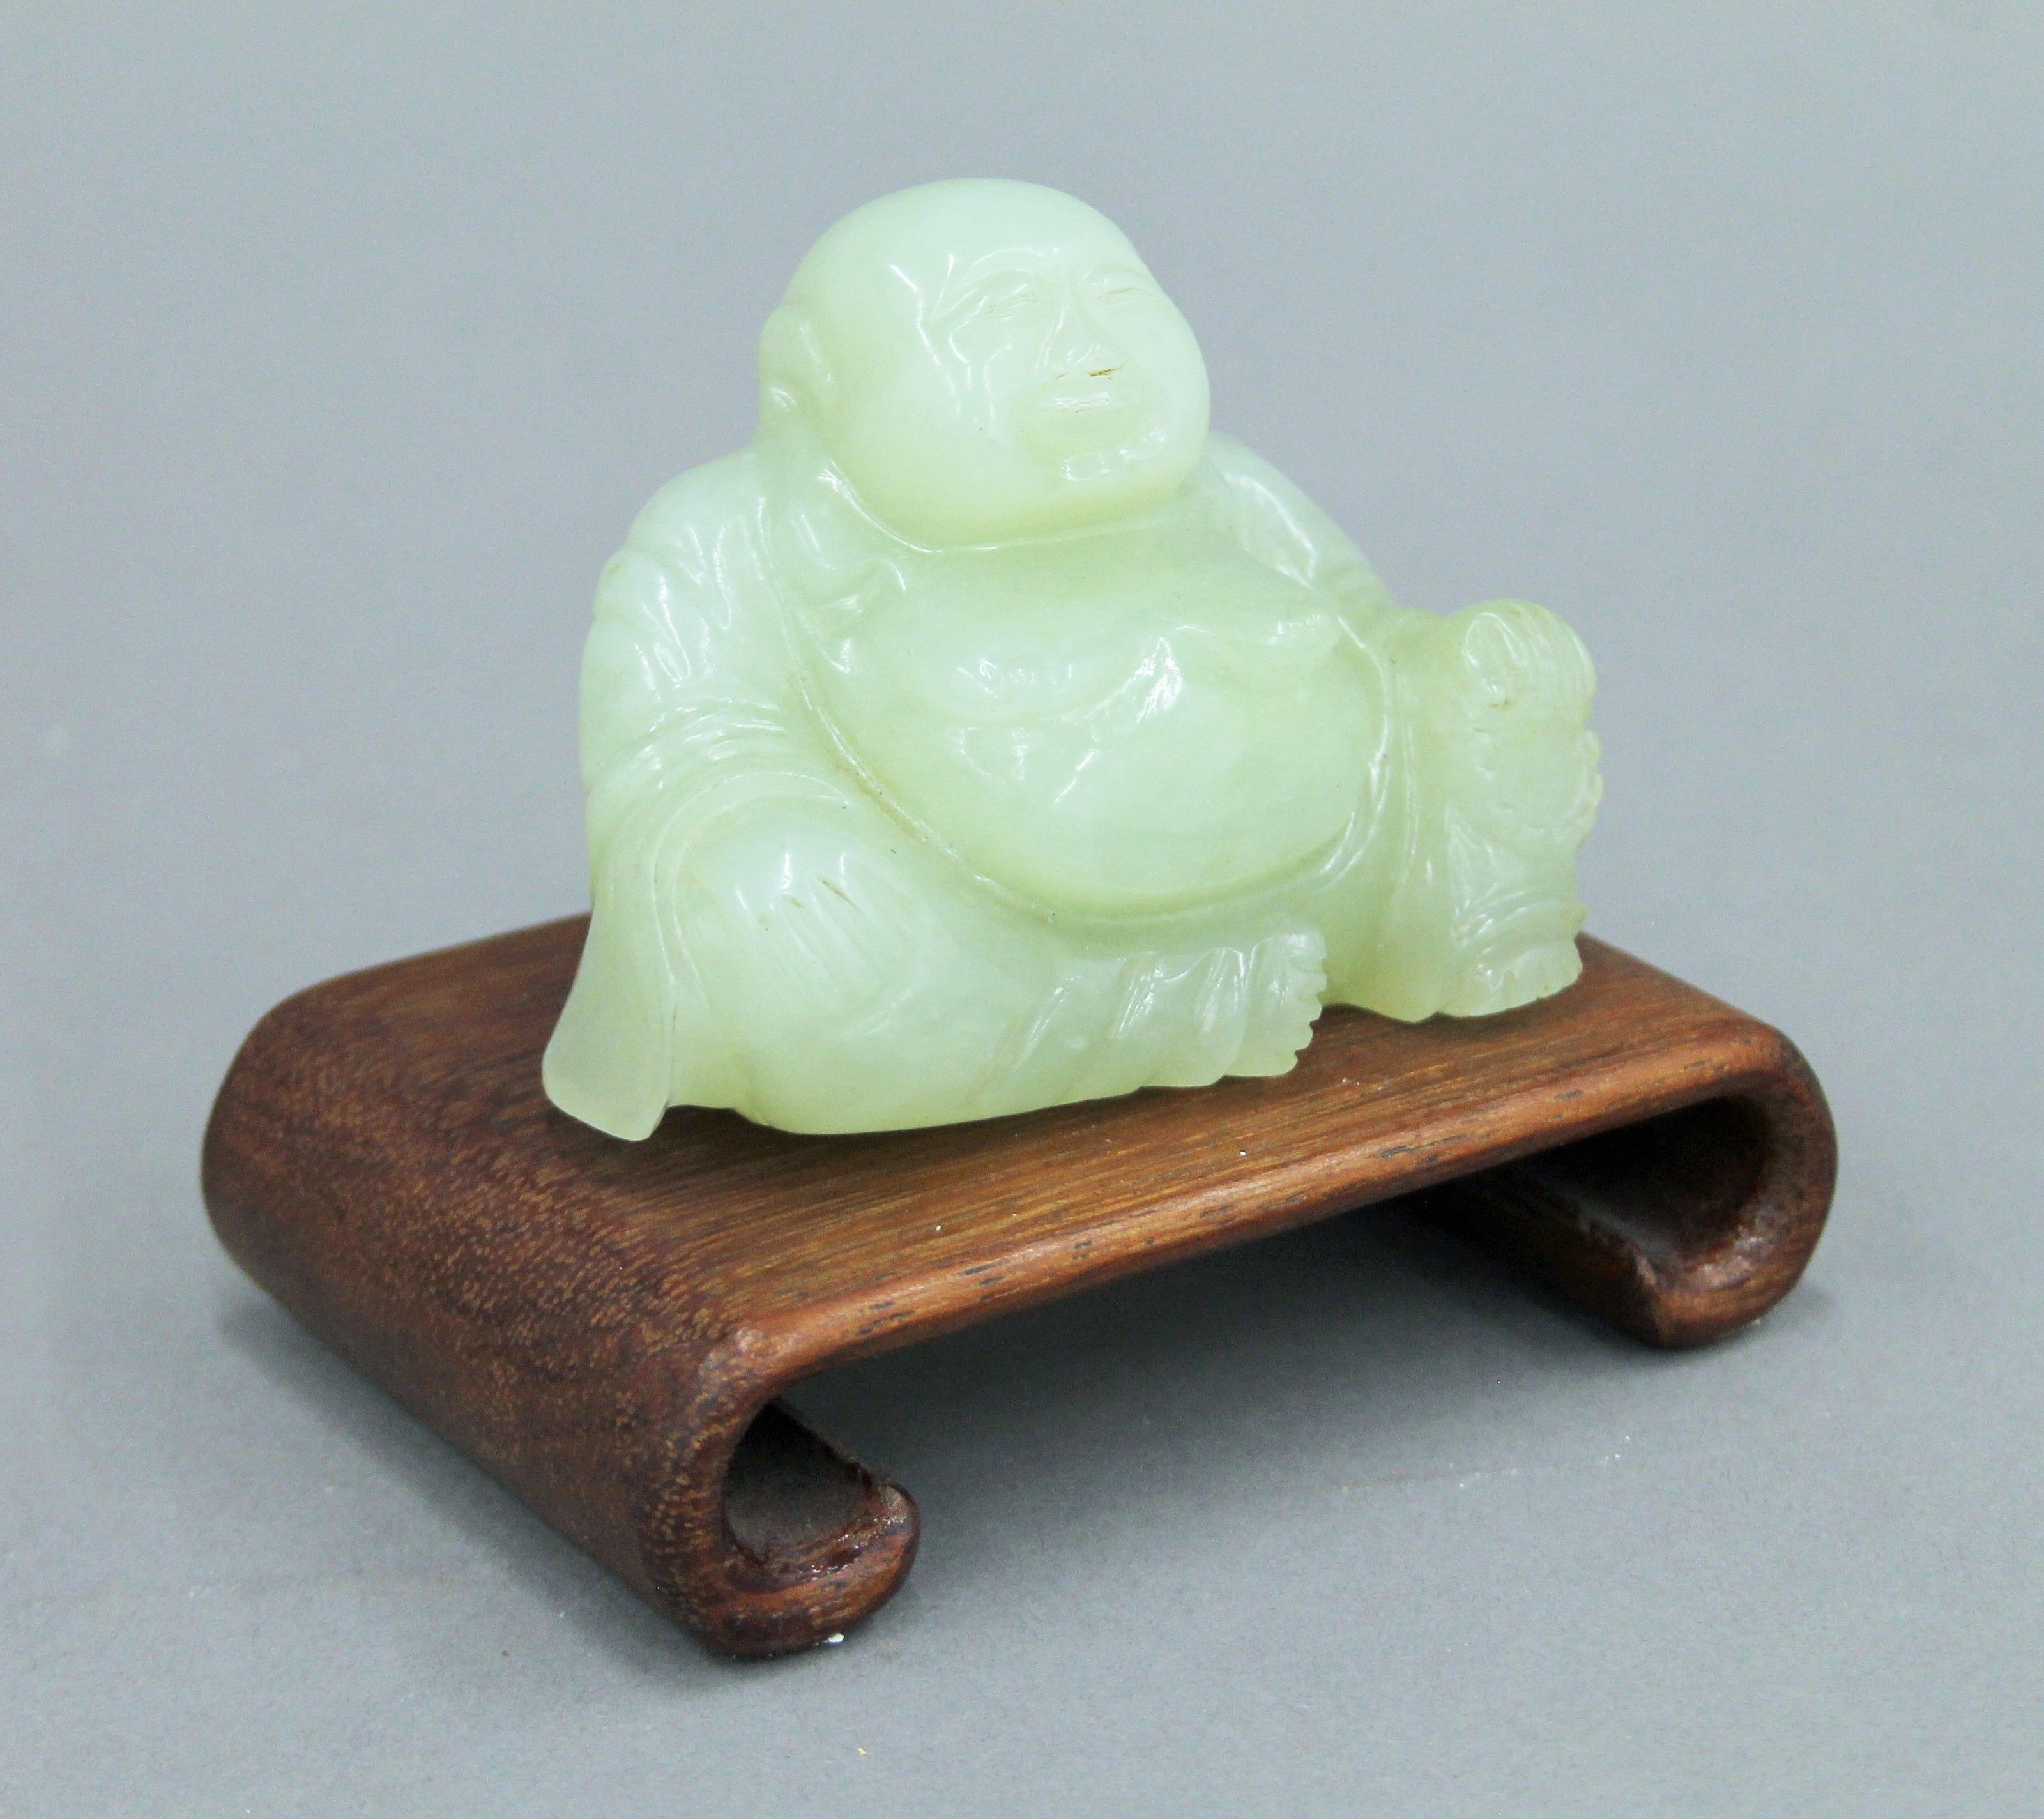 A Chinese model of Buddha on a wooden stand. 10 cm high overall. - Image 4 of 5